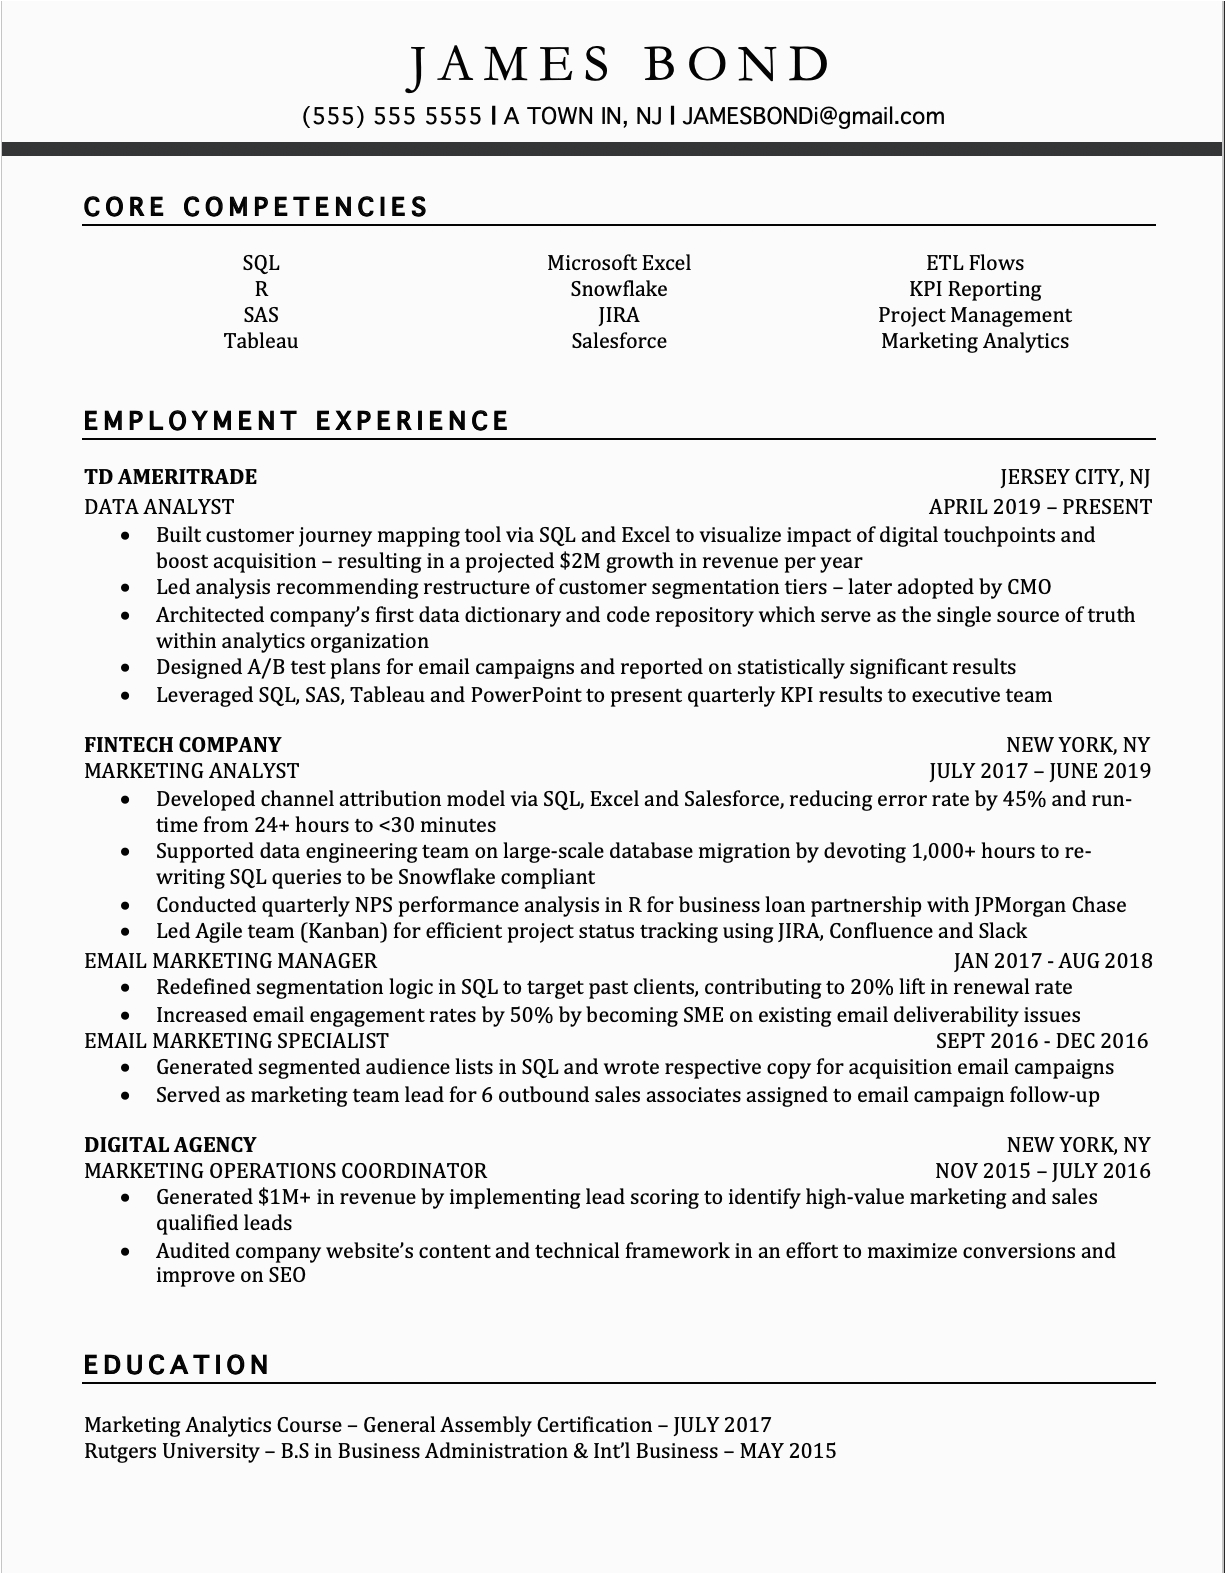 Resume Template Multiple Positions Same Company Resume format Multiple Positions In Same Pany